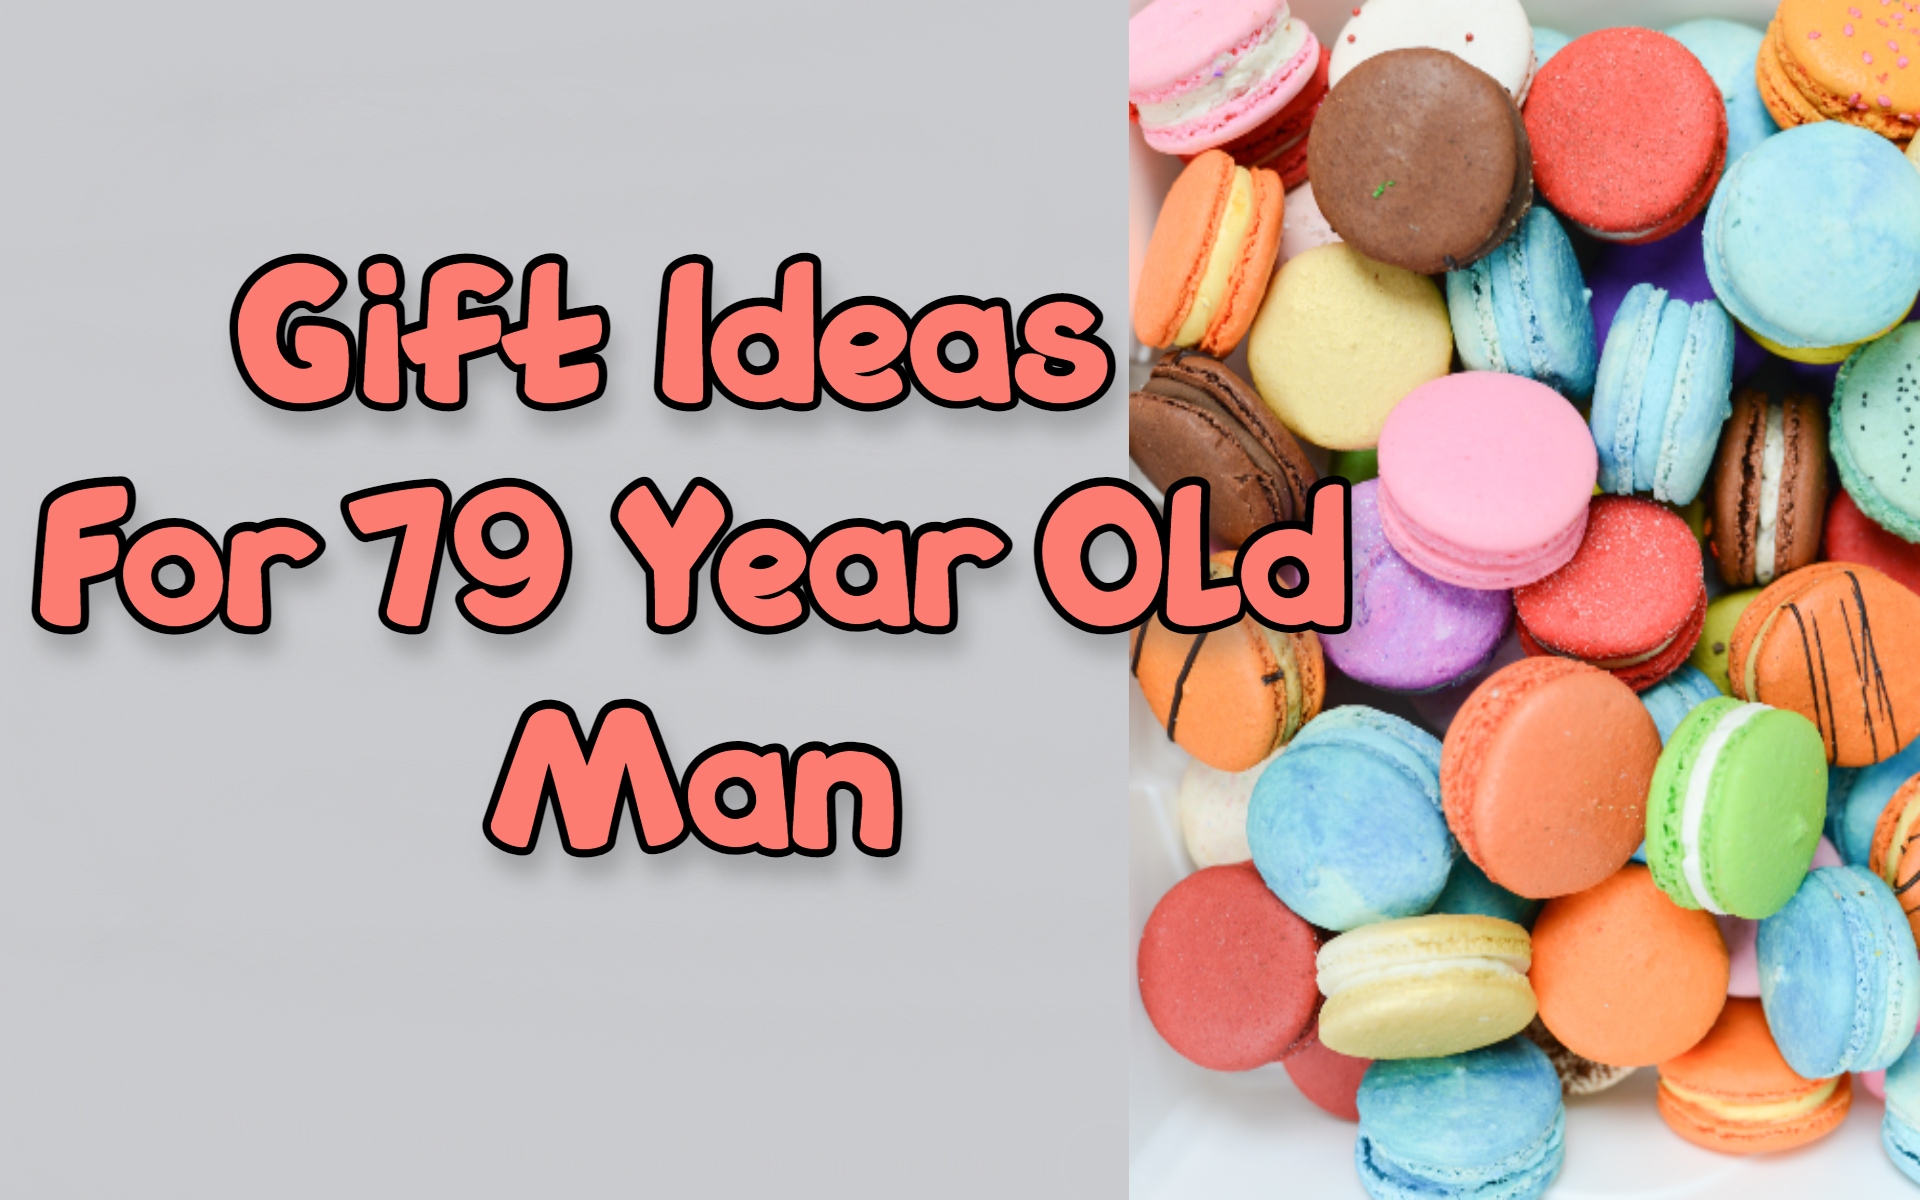 Cover image of gift ideas for 79-year-old man by Giftsedge